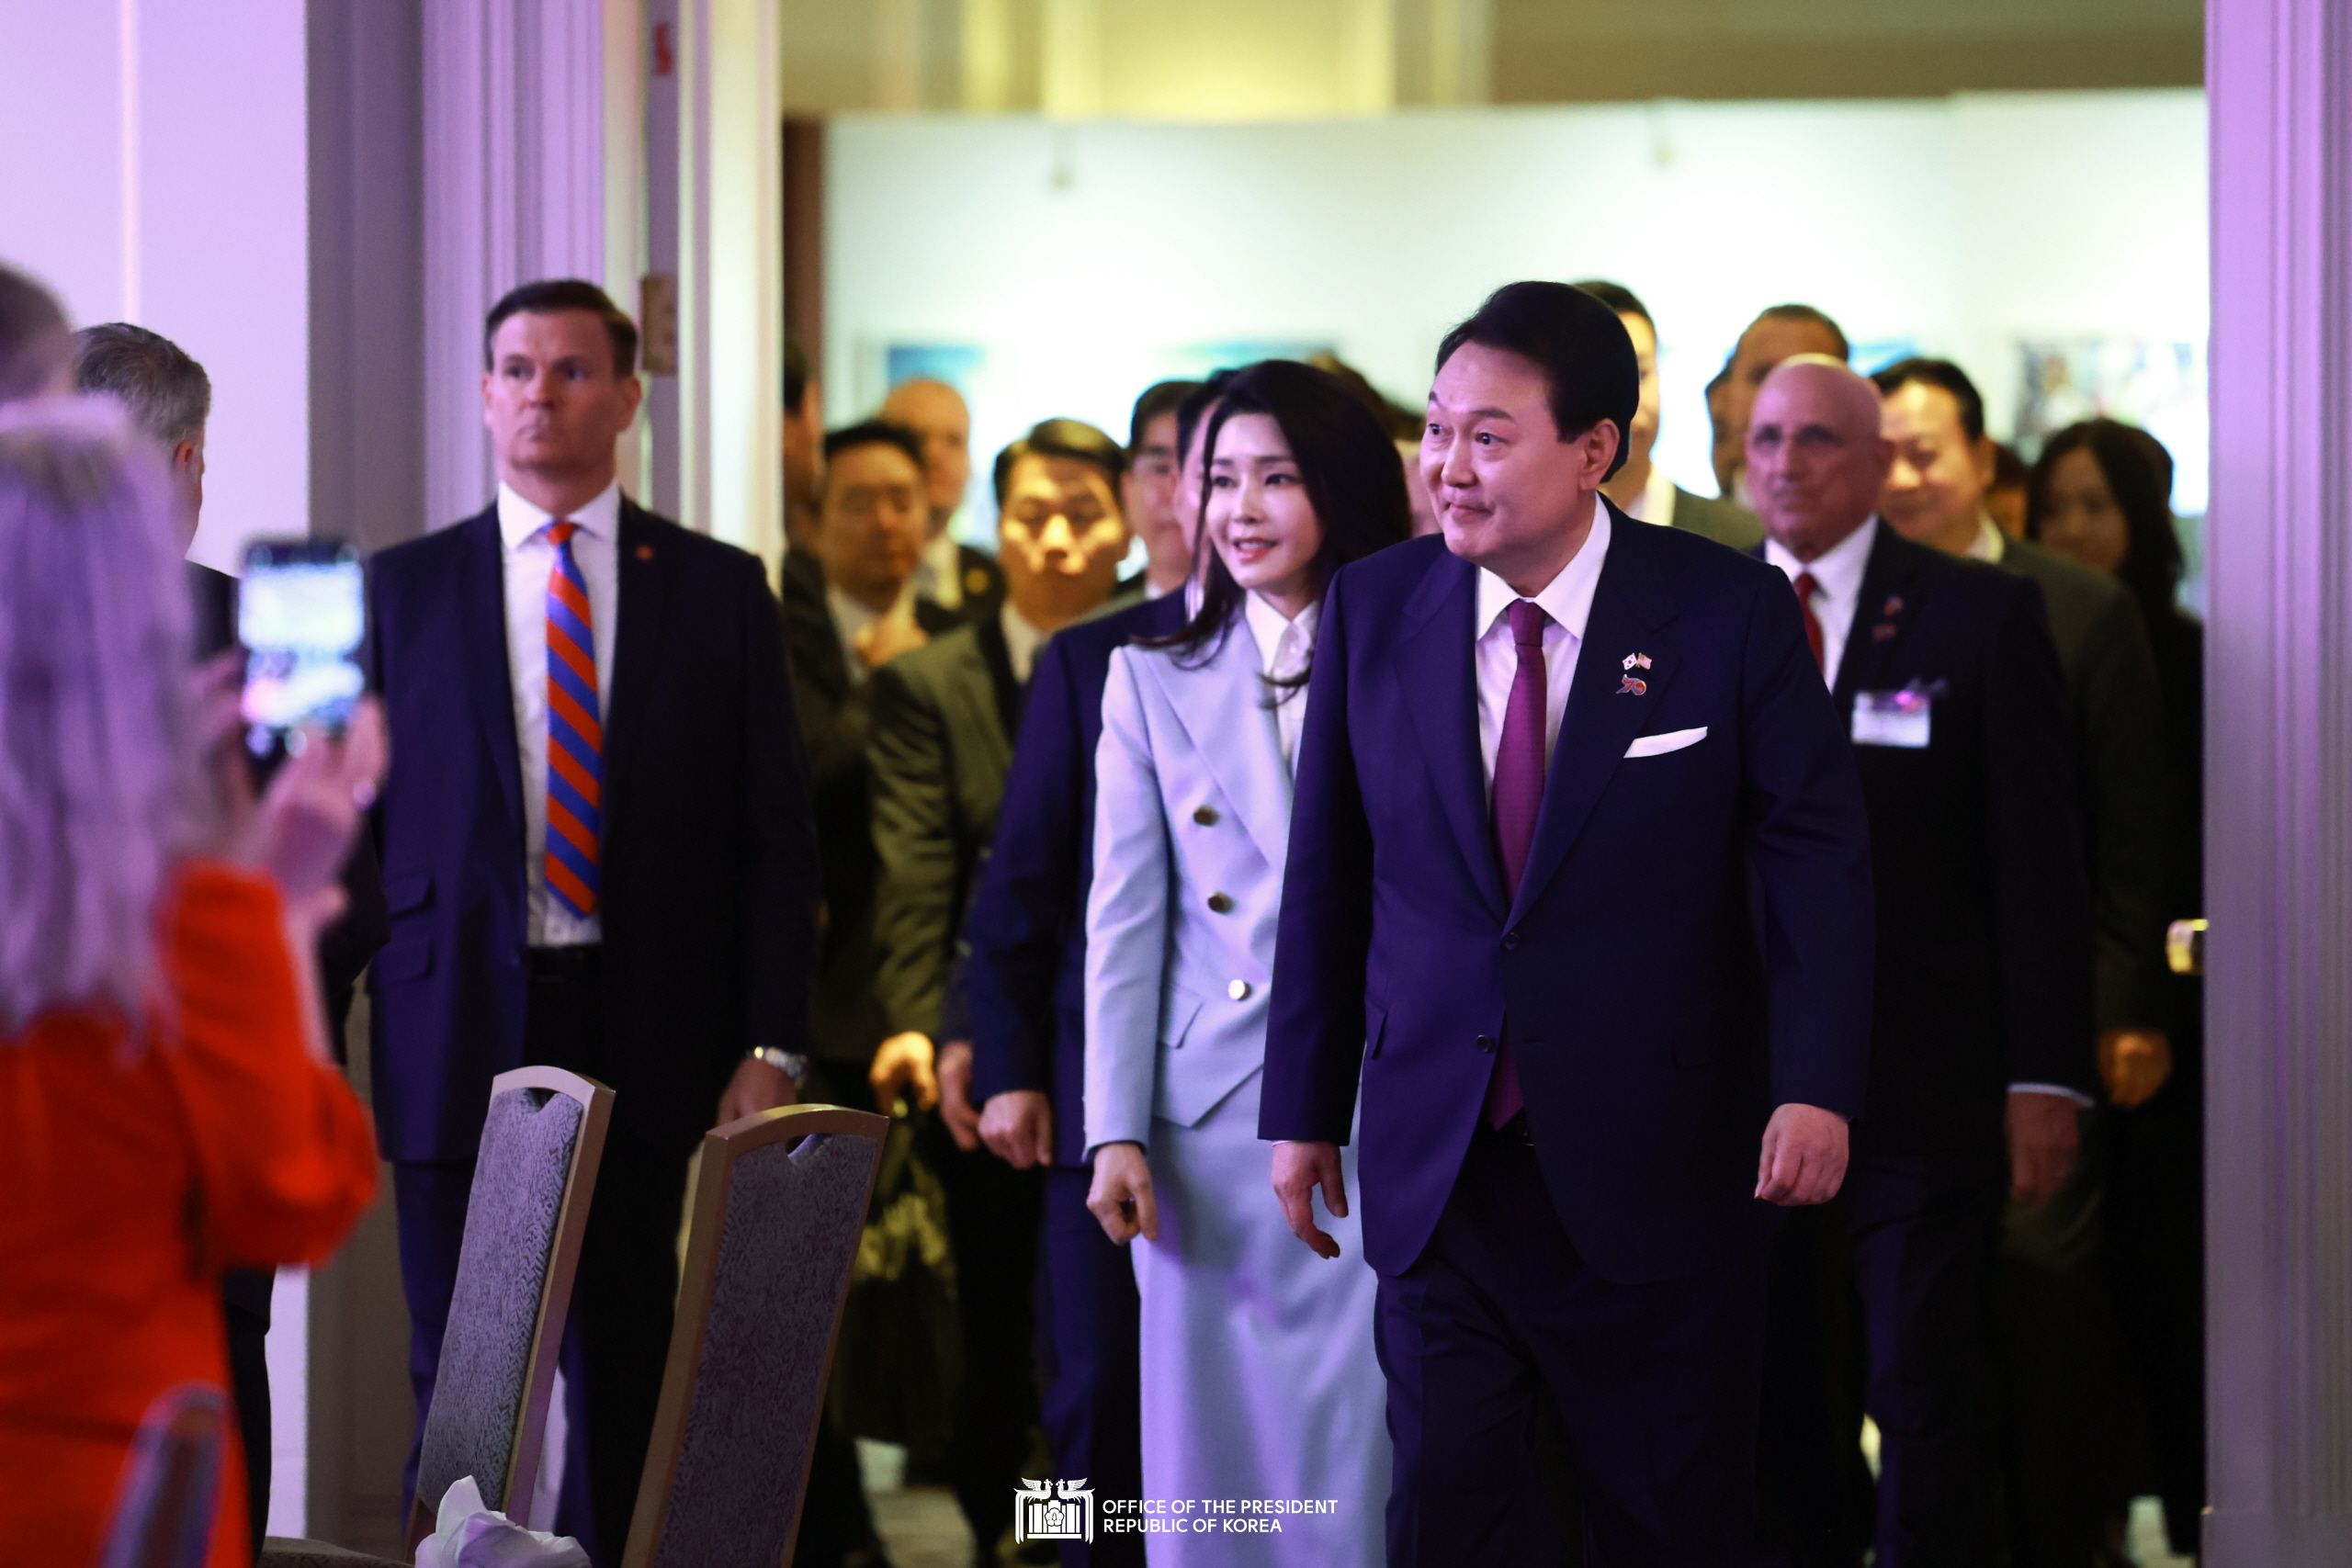 The President and First Lady attending the Luncheon Commemorating the 70th anniversary of the ROK-U.S. Alliance slide 1